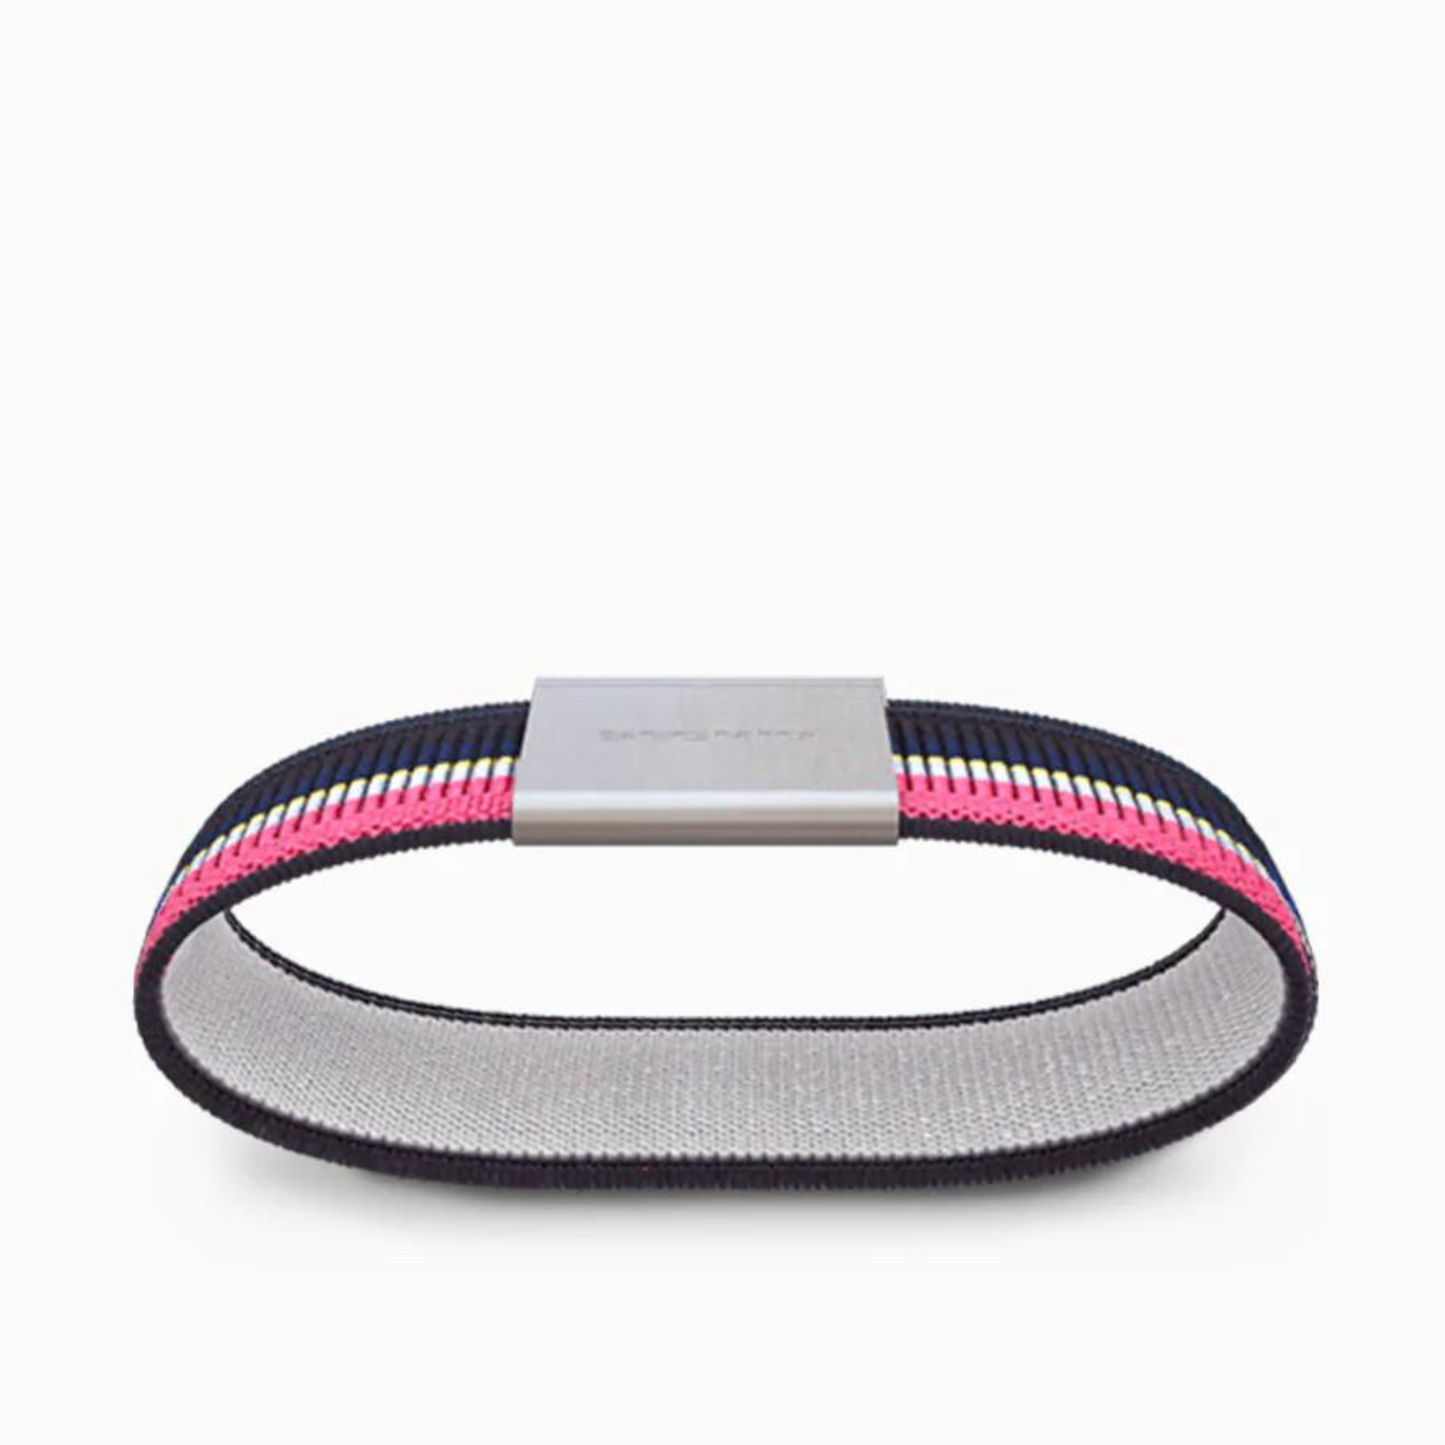 The neon pink stripped band is pictured from below revealing the light grey lining. The silver metal buckle sits on the top of the loop.